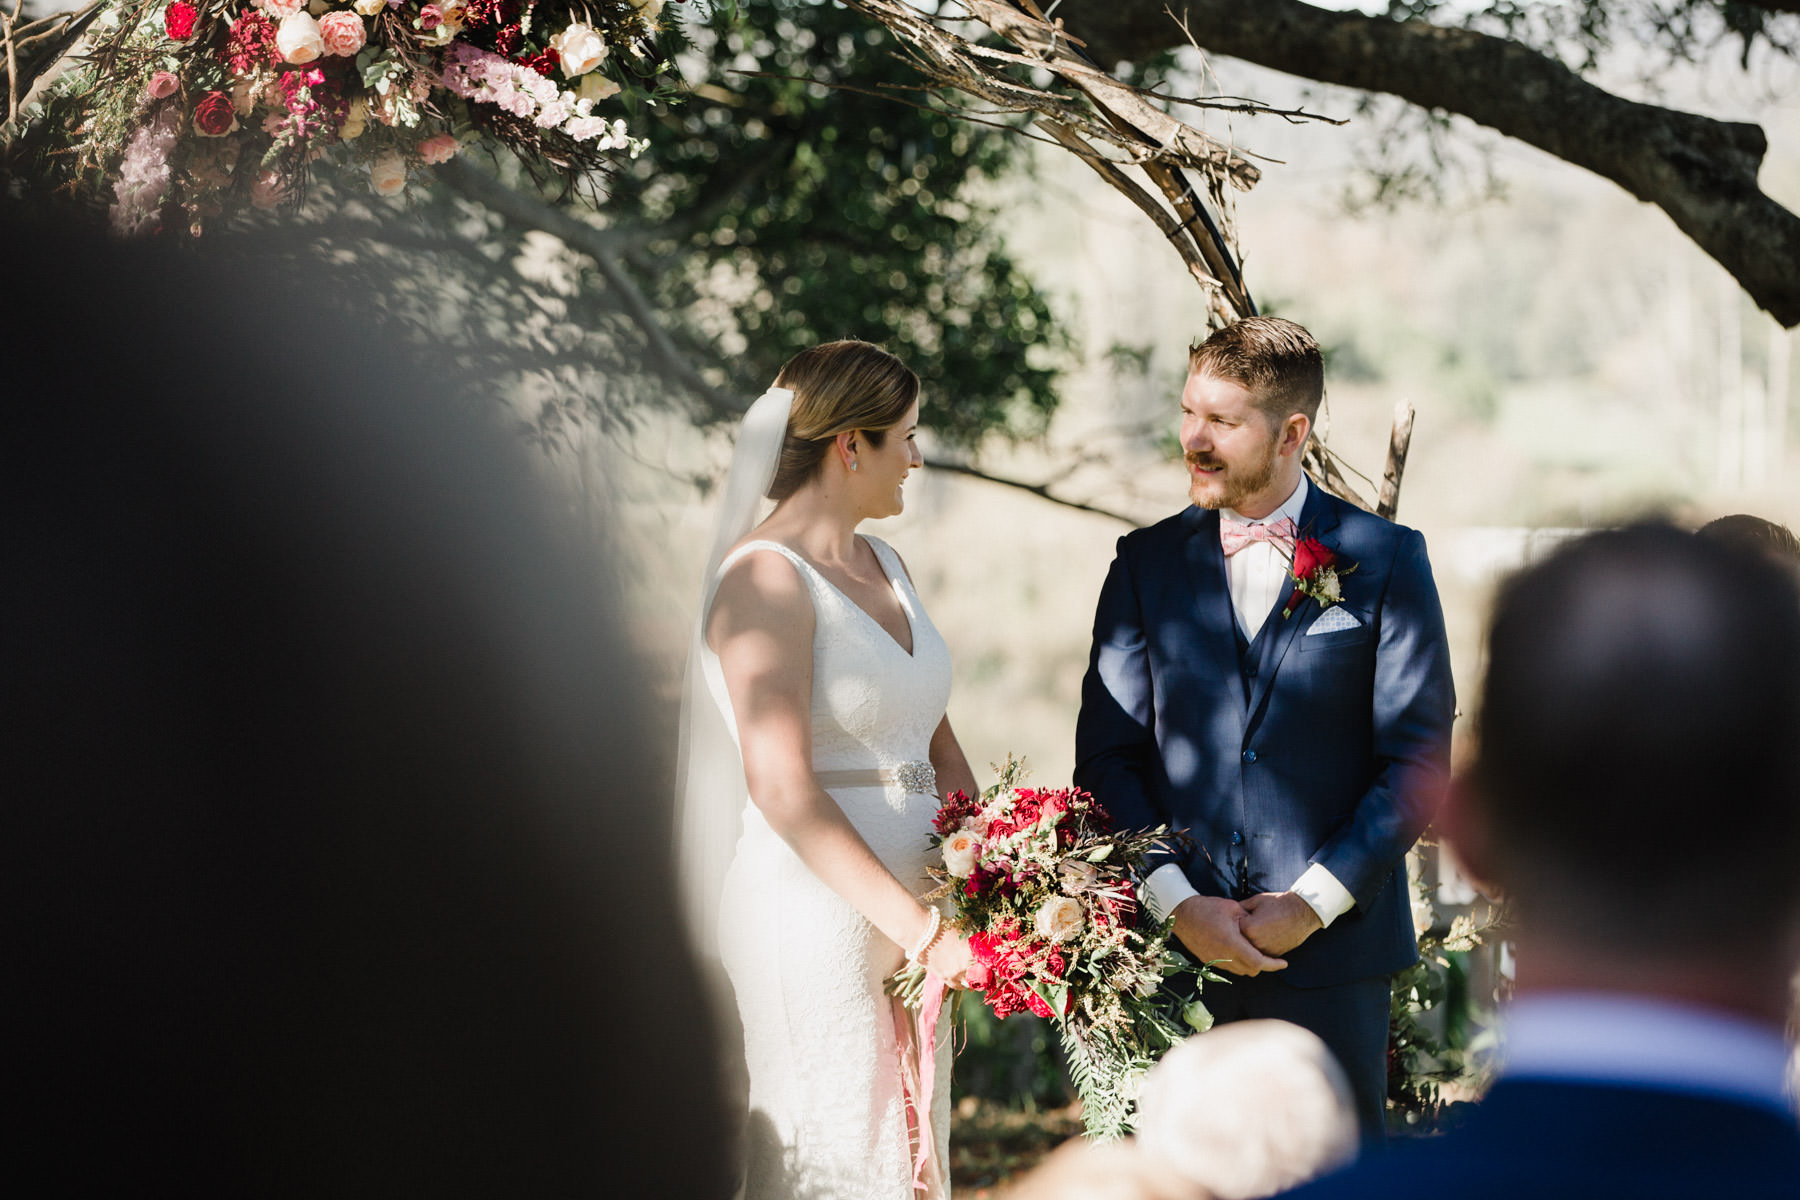 056Hunter Valley Wedding Photographers Bryce Noone Photography at Tocal Homestead Wedding Venue.jpg